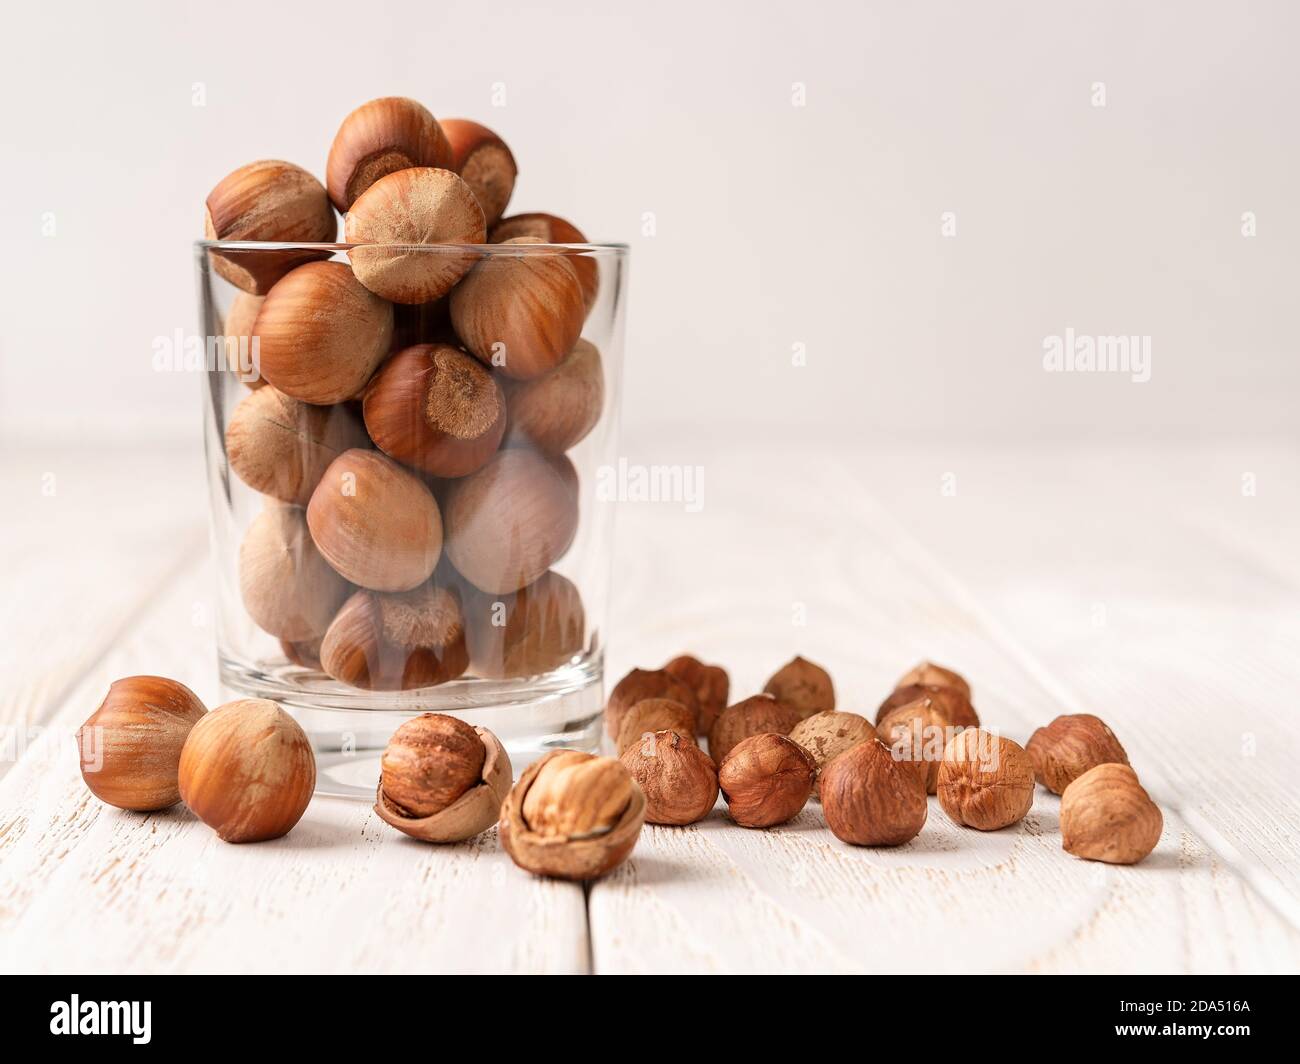 Whole hazelnuts in a glass over white wood table. Healthy vegetarian eating, antioxidant and protein source. Ketogenic and raw food diets ingredient. Stock Photo